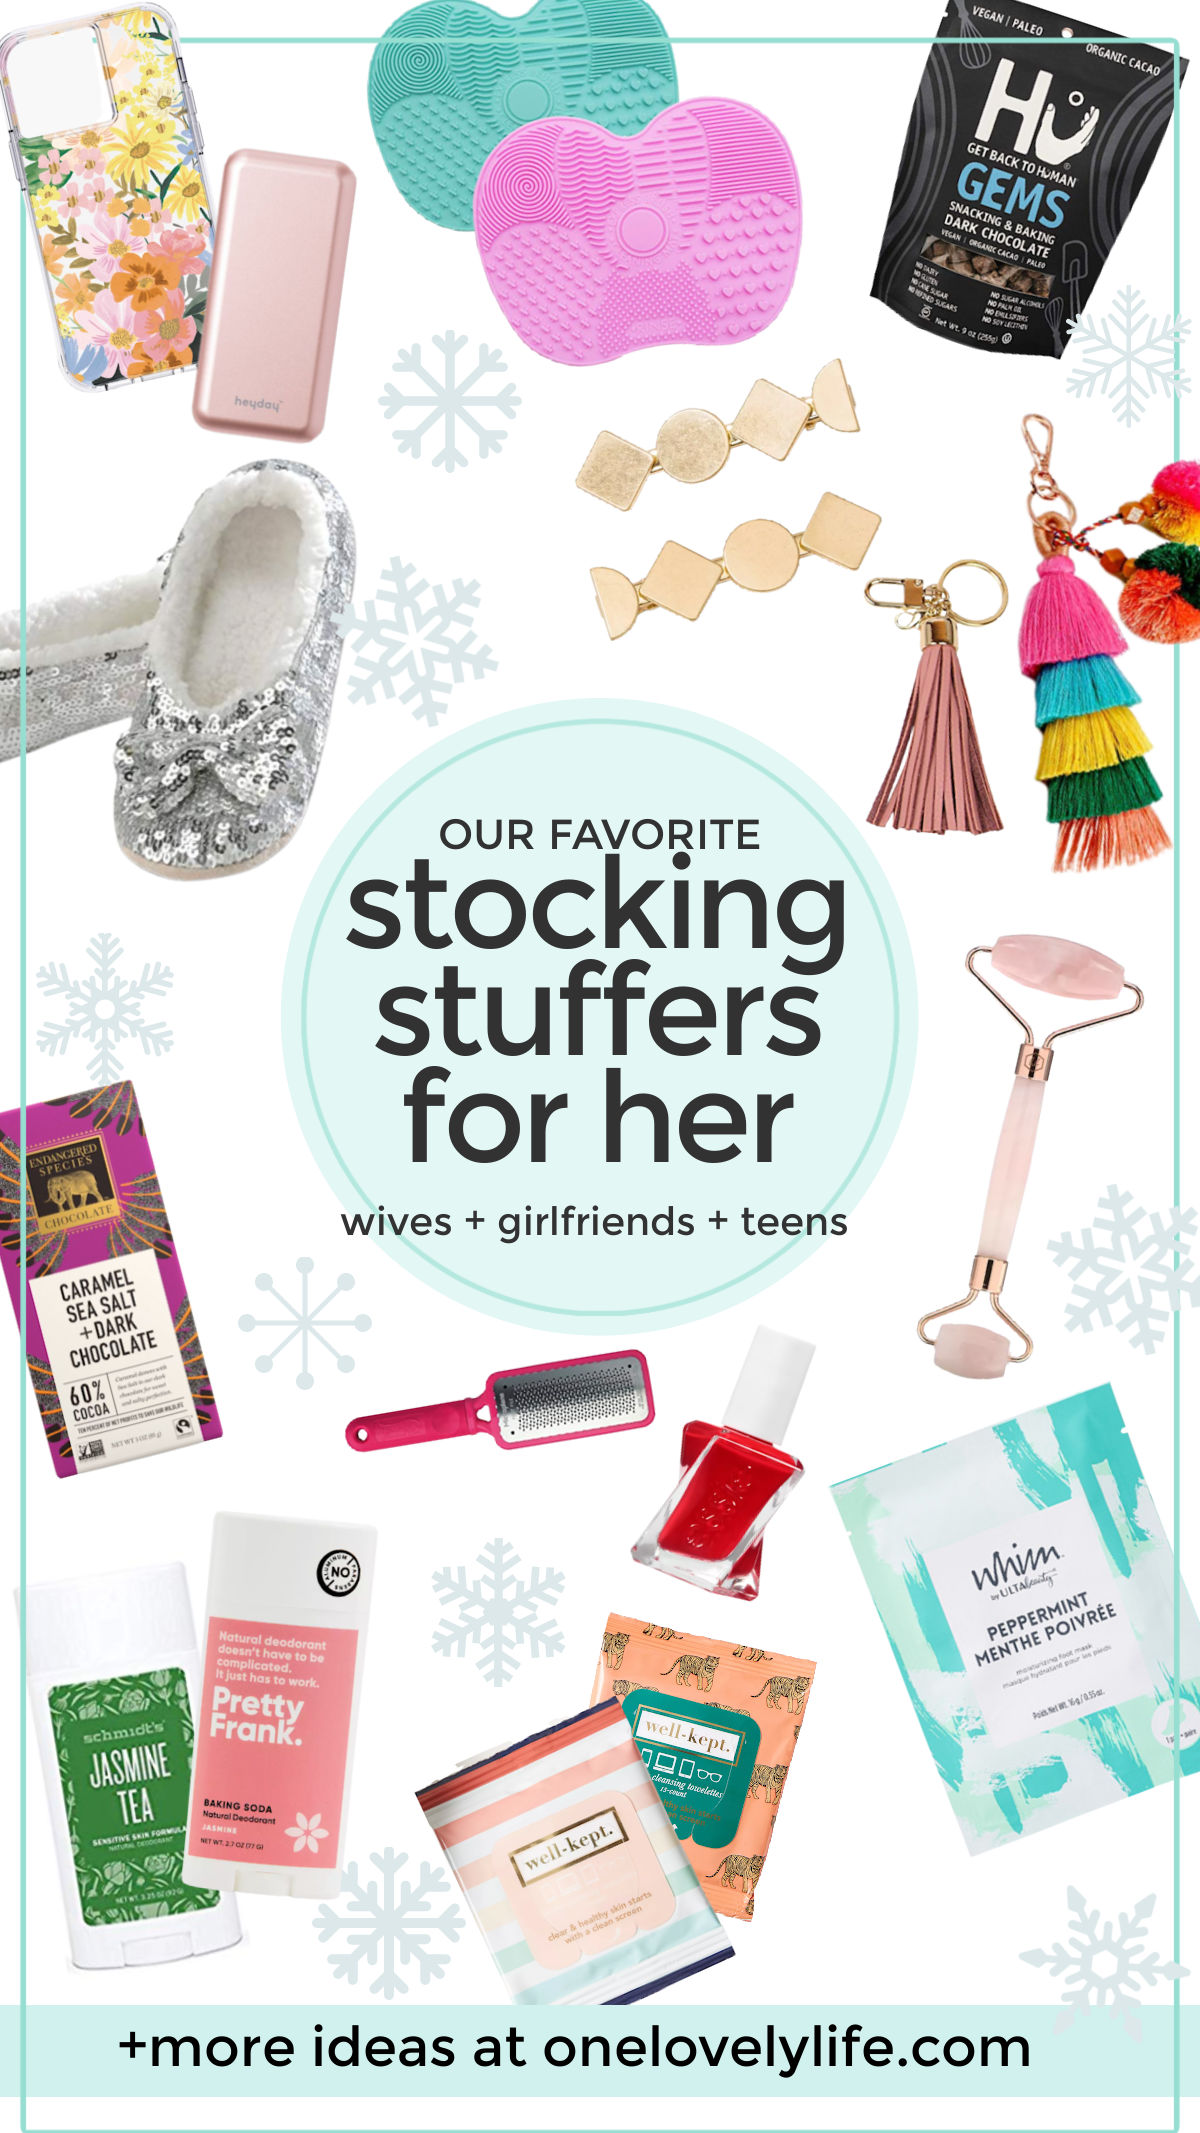 Stocking Stuffer Ideas for Him and Her - Make stocking stuffers steal the show this year with these great stocking stuffers for him and her! // Stocking Stuffers for Men // Stocking Stuffers for Women // Stocking Stuffers for Husbands // Stocking Stuffers for Wife // Stocking Stuffers for teens // Stocking Stuffers For Teenagers #stockingstuffers #giftideas #holidaygiftt #stockings